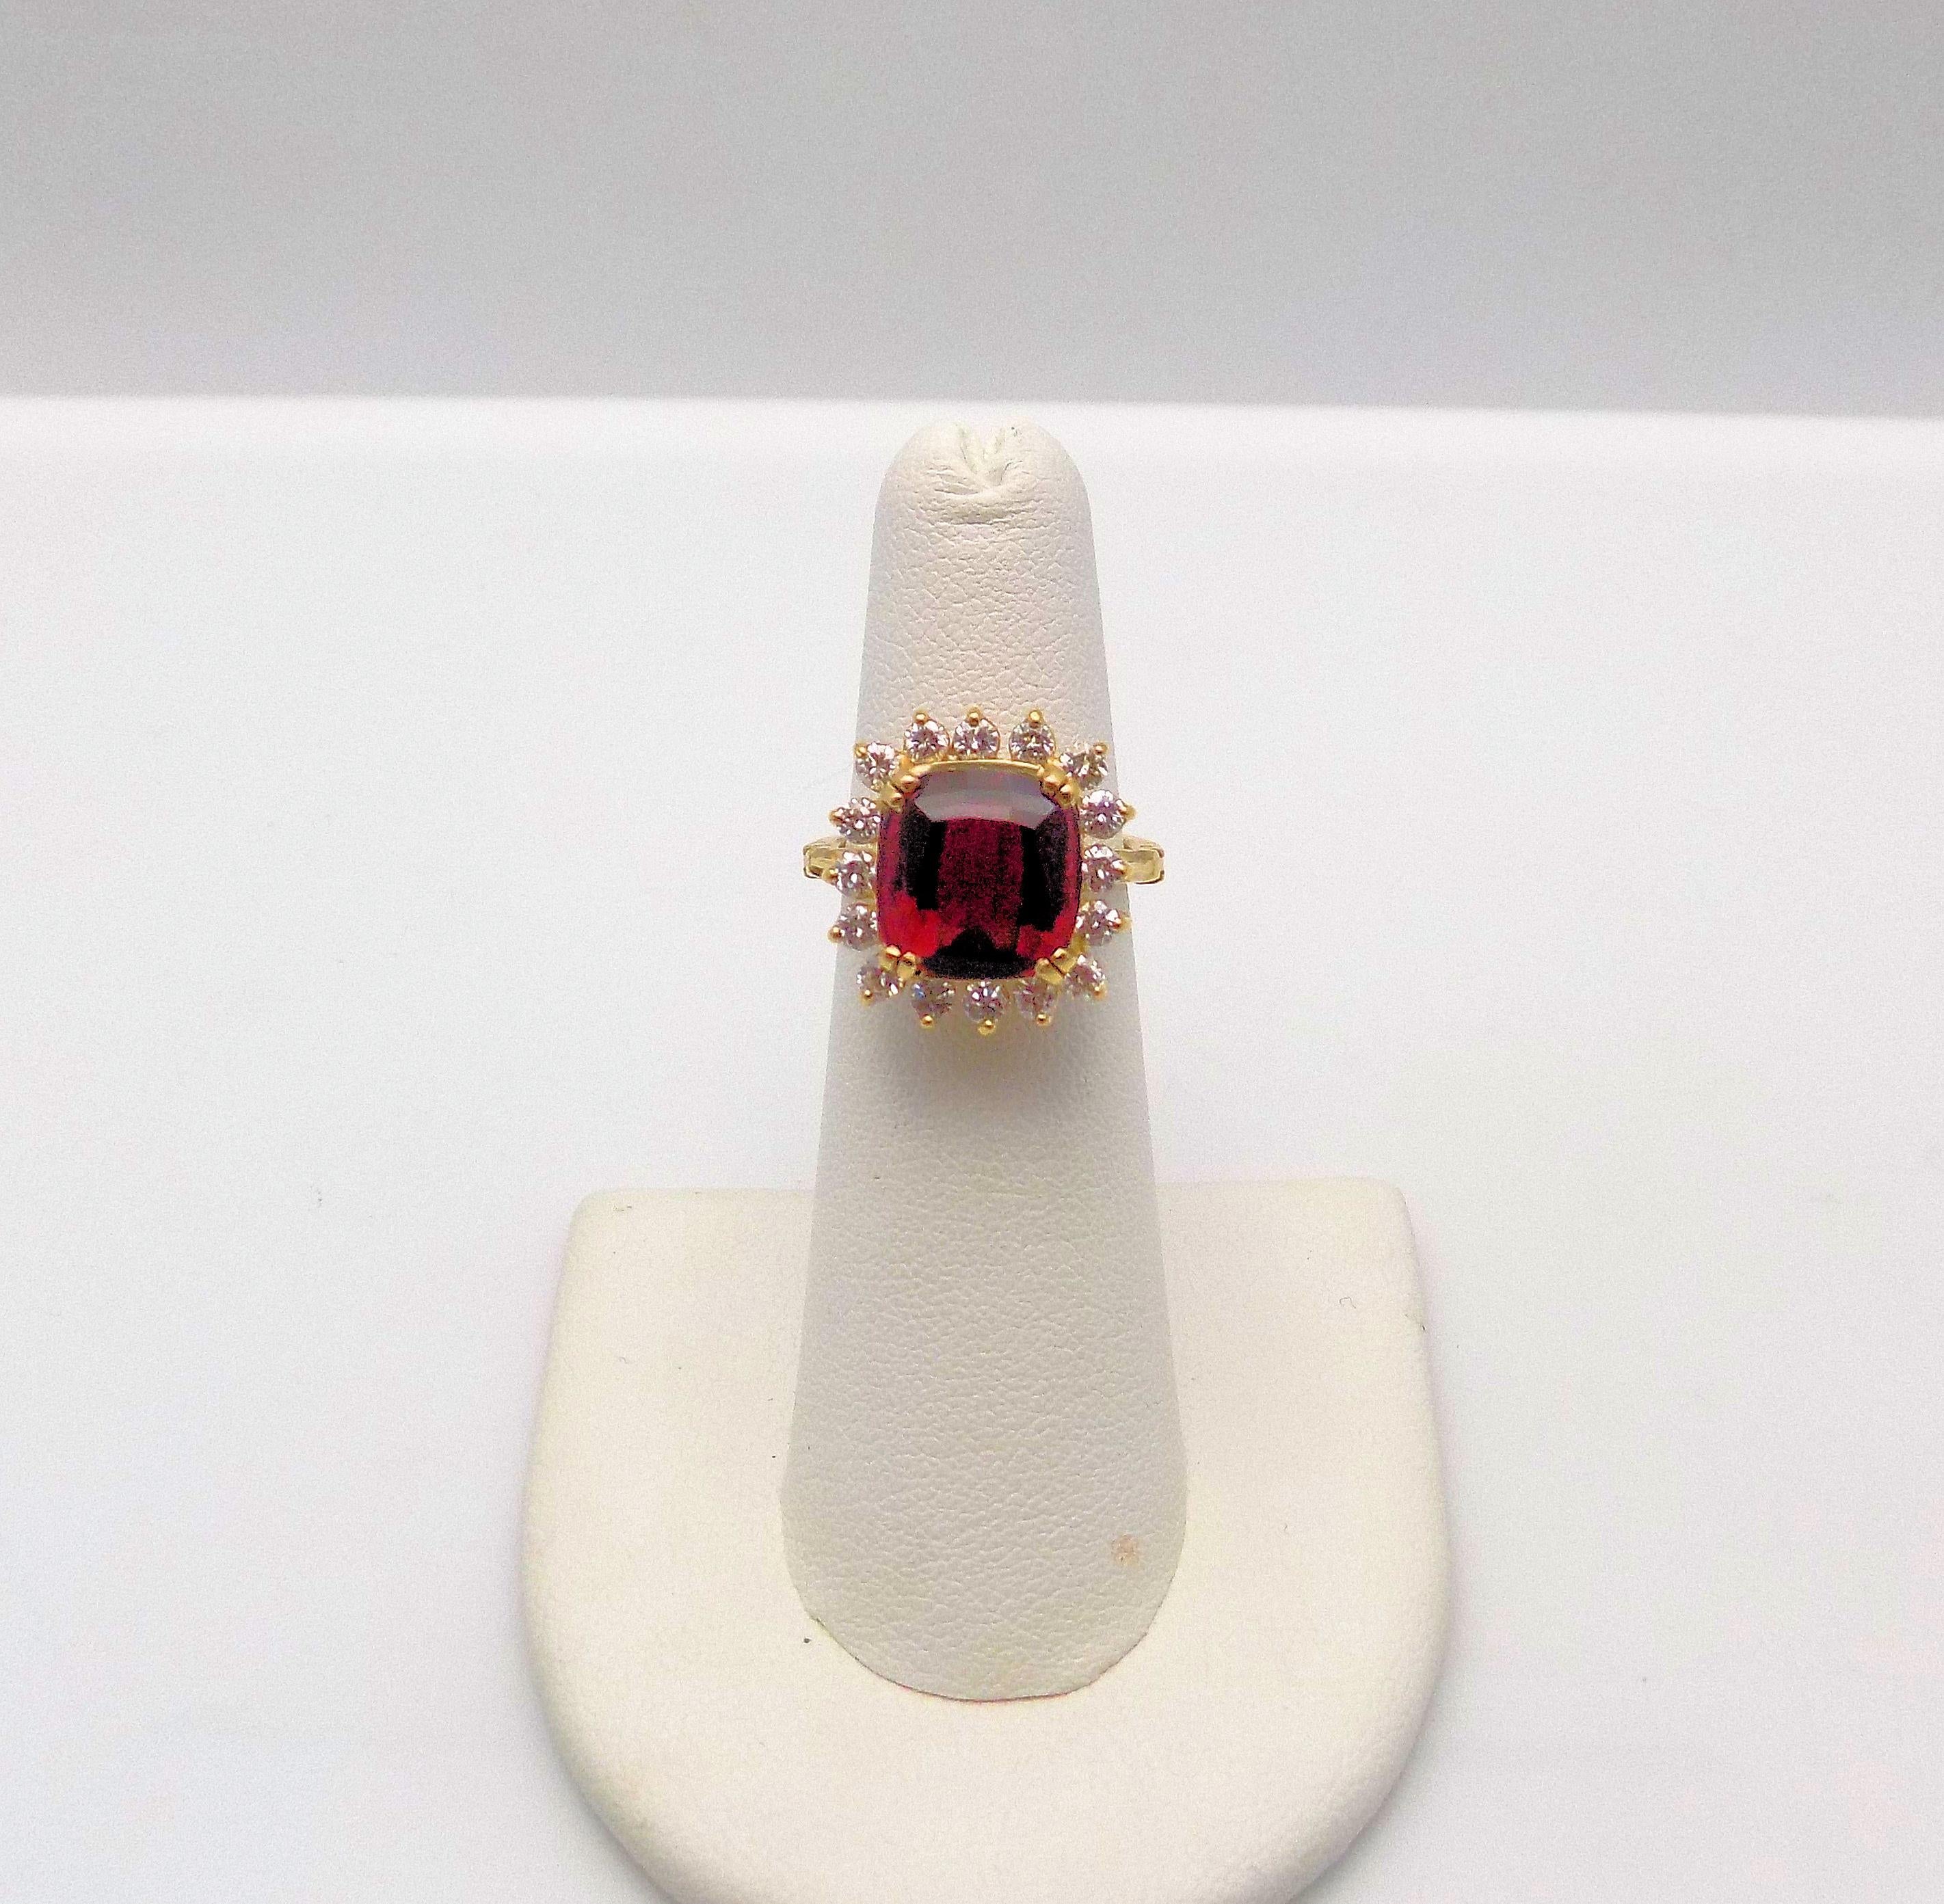 Classic 14 Karat Yellow Gold Ring Featuring 1 Cushion Cut Rubellite 3.81 Carat, 16 Round Brilliant Diamonds 0.96 Carat Total Weight, SI-1 toSI-2, G-H with Expandable Shank.  Ring Size/Finger Size 5; 3.9 DWT or 6.07 Grams.